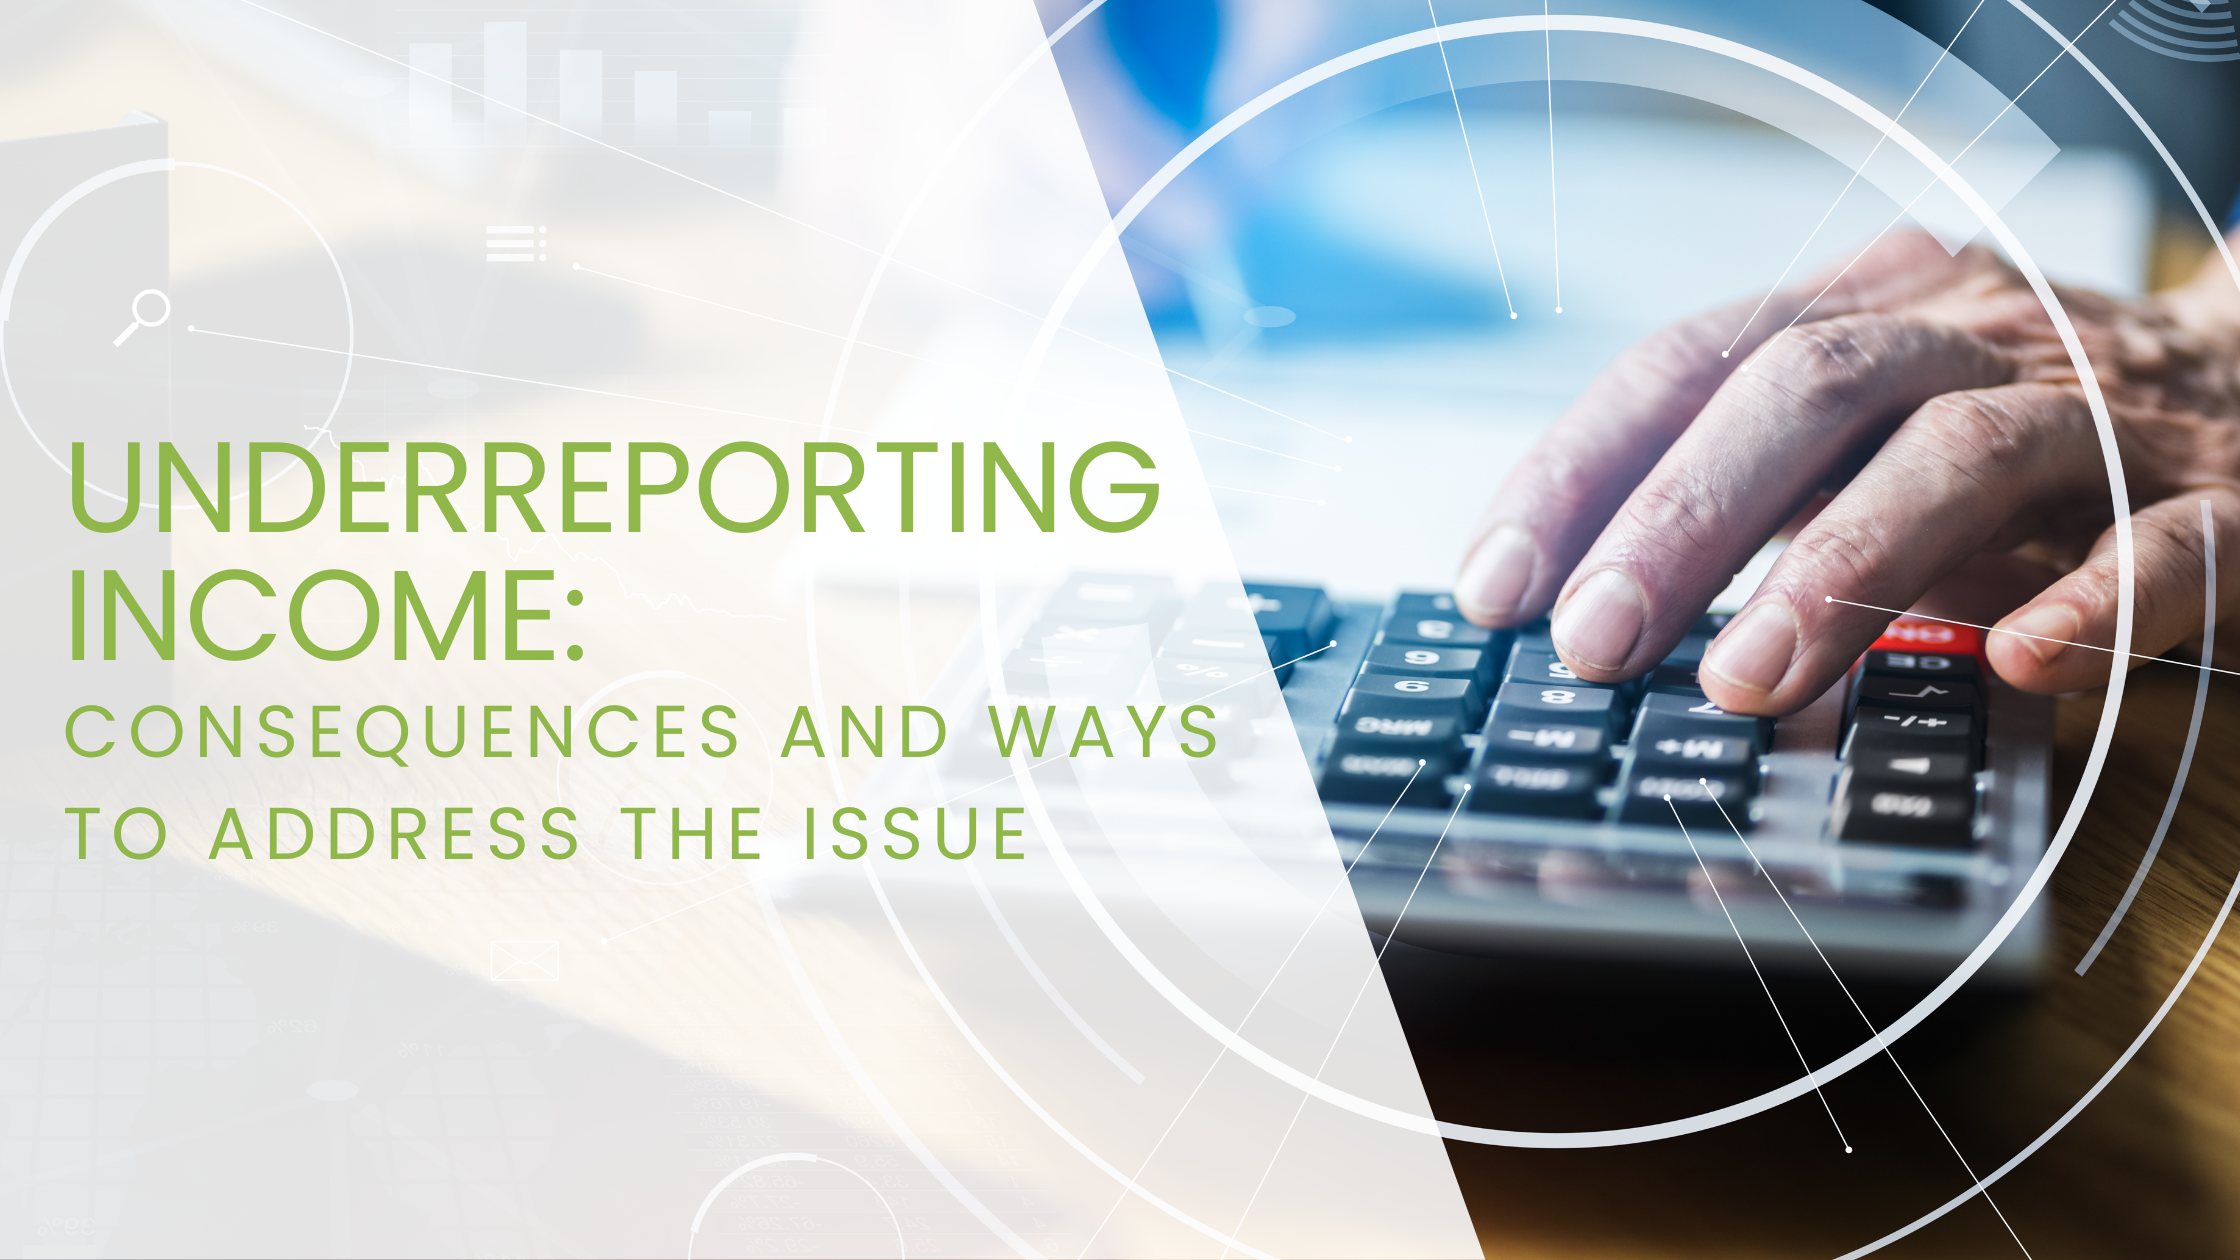 Underreporting Income: Consequences and Ways to Address the Issue